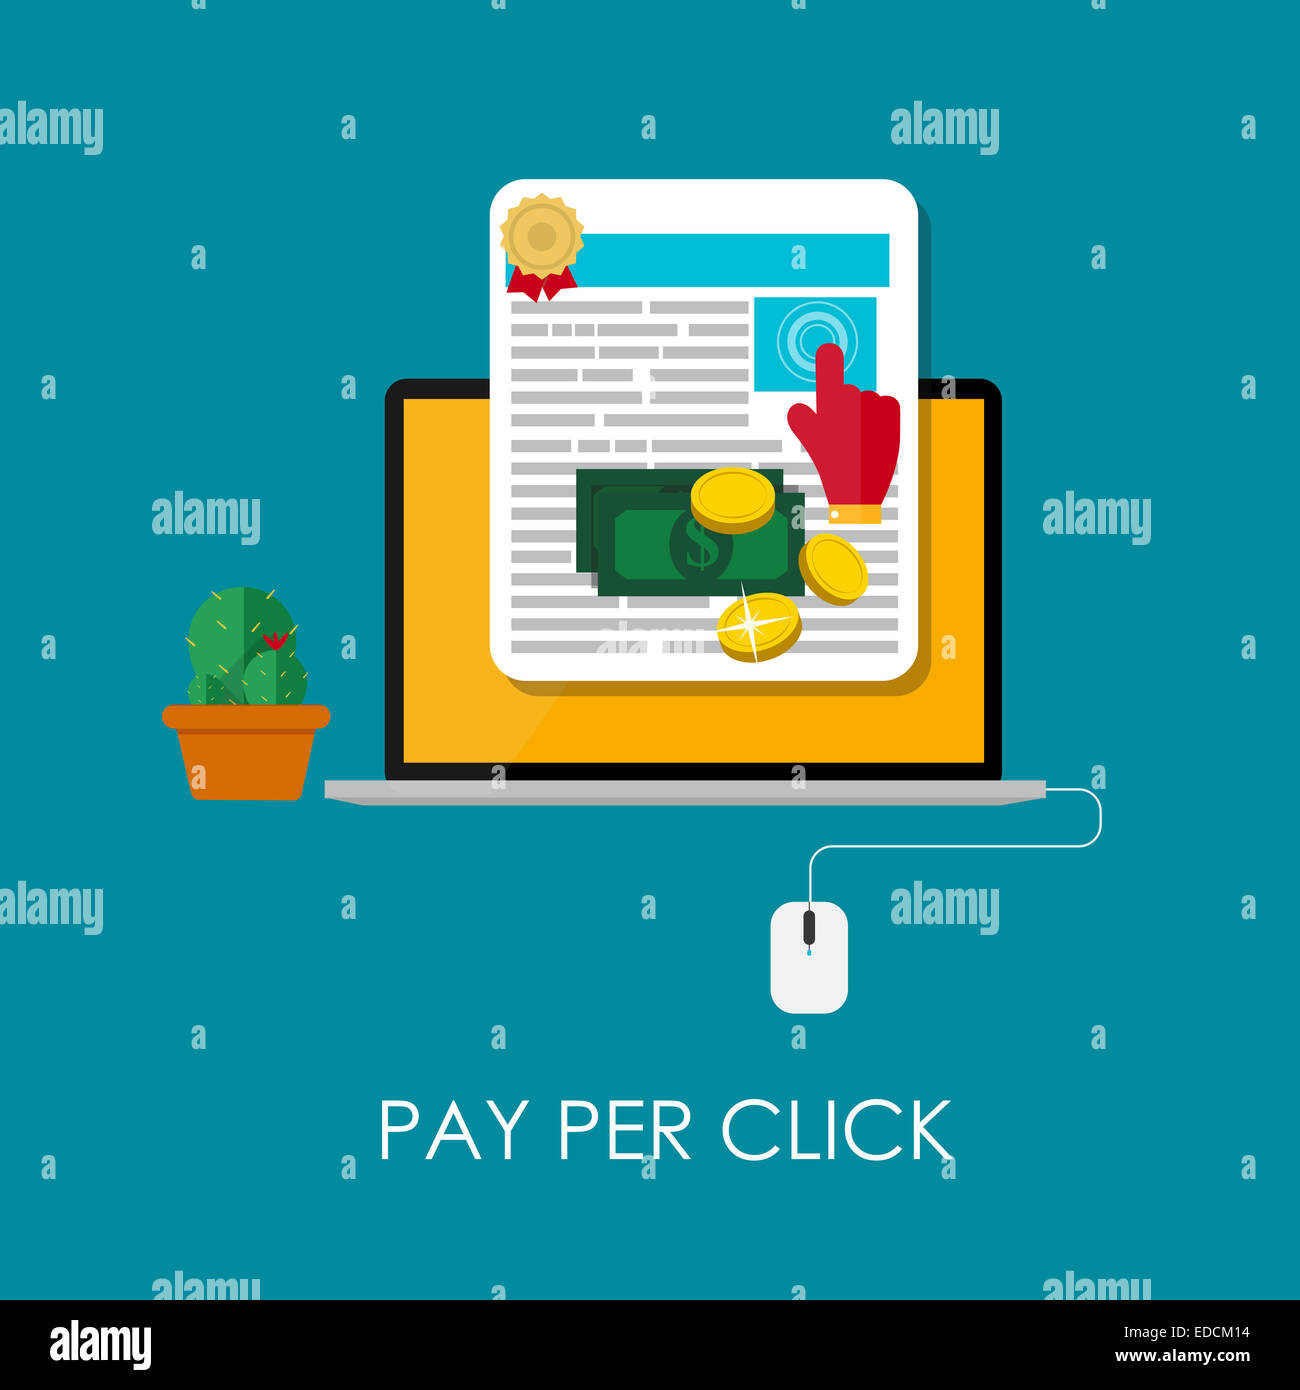 Pay Per Click Flat Concept for Web Marketing. Vector Illustration Stock Photo